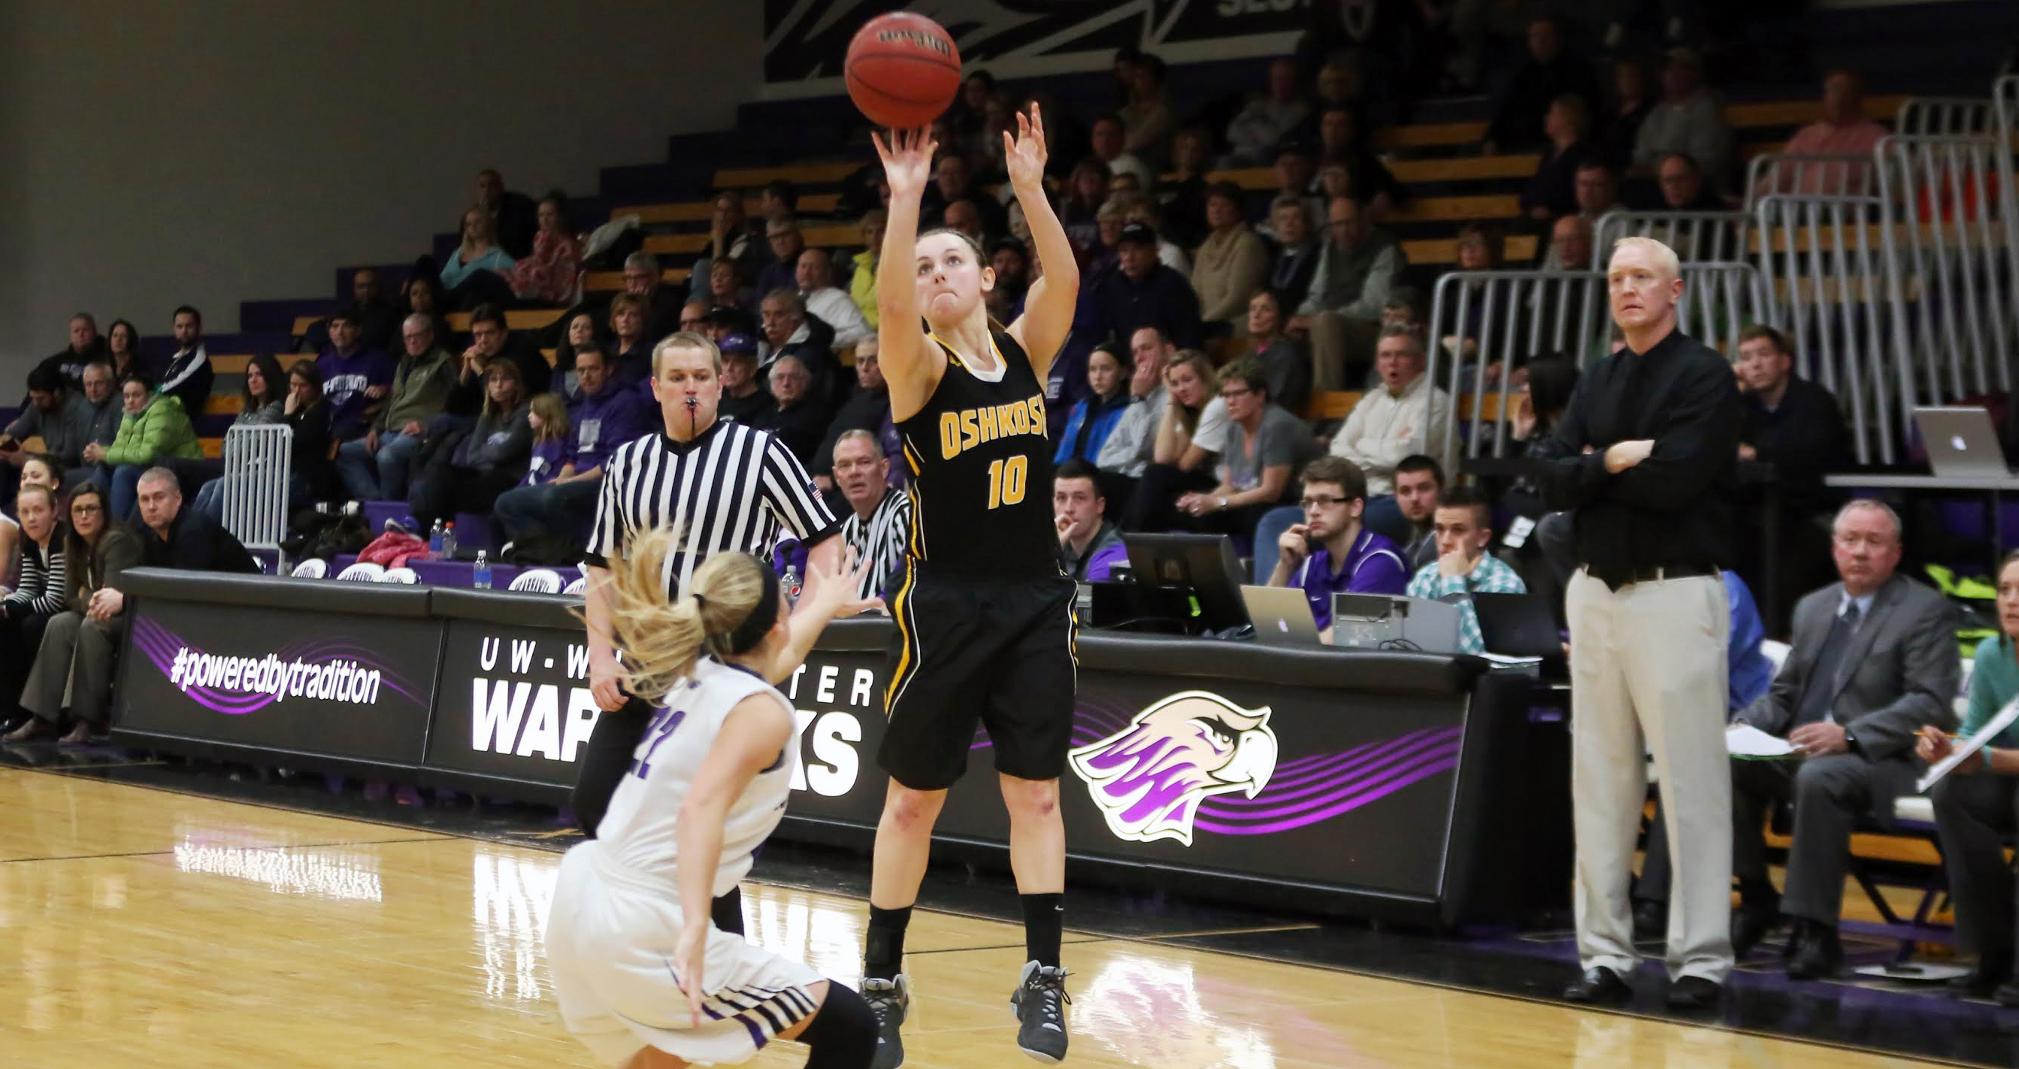 Taylor Schmidt scored a game-high 23 points against the Warhawks, including three 3-point baskets.